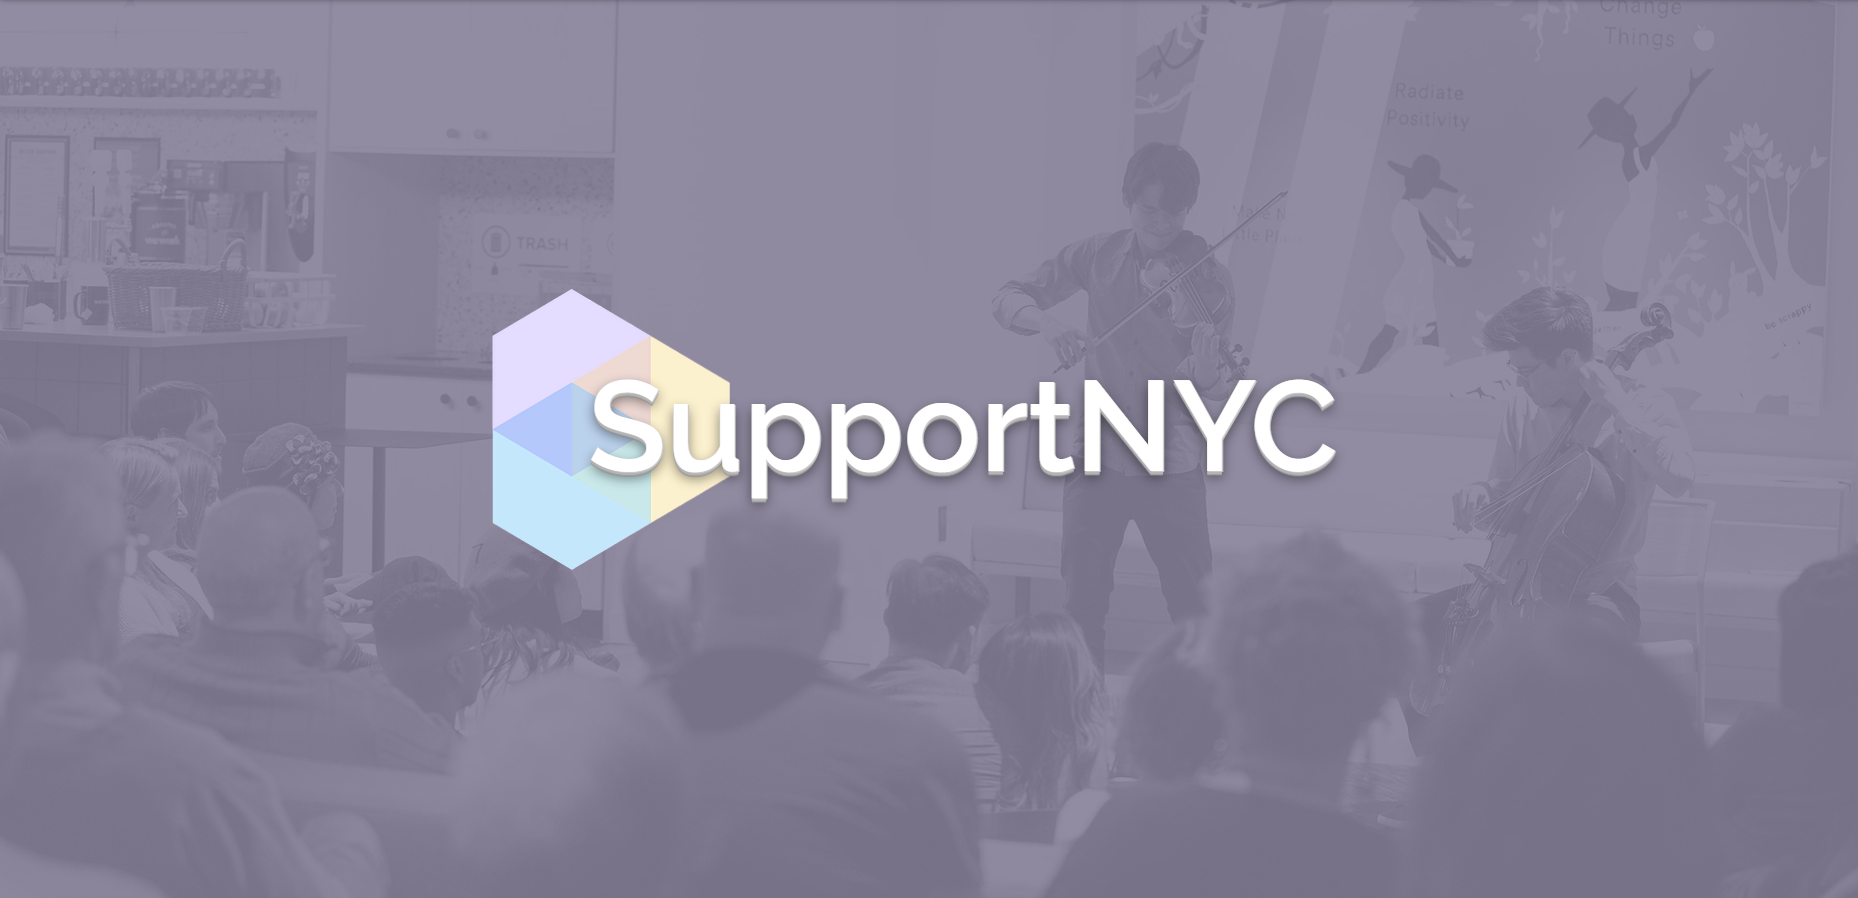 SupportNYC